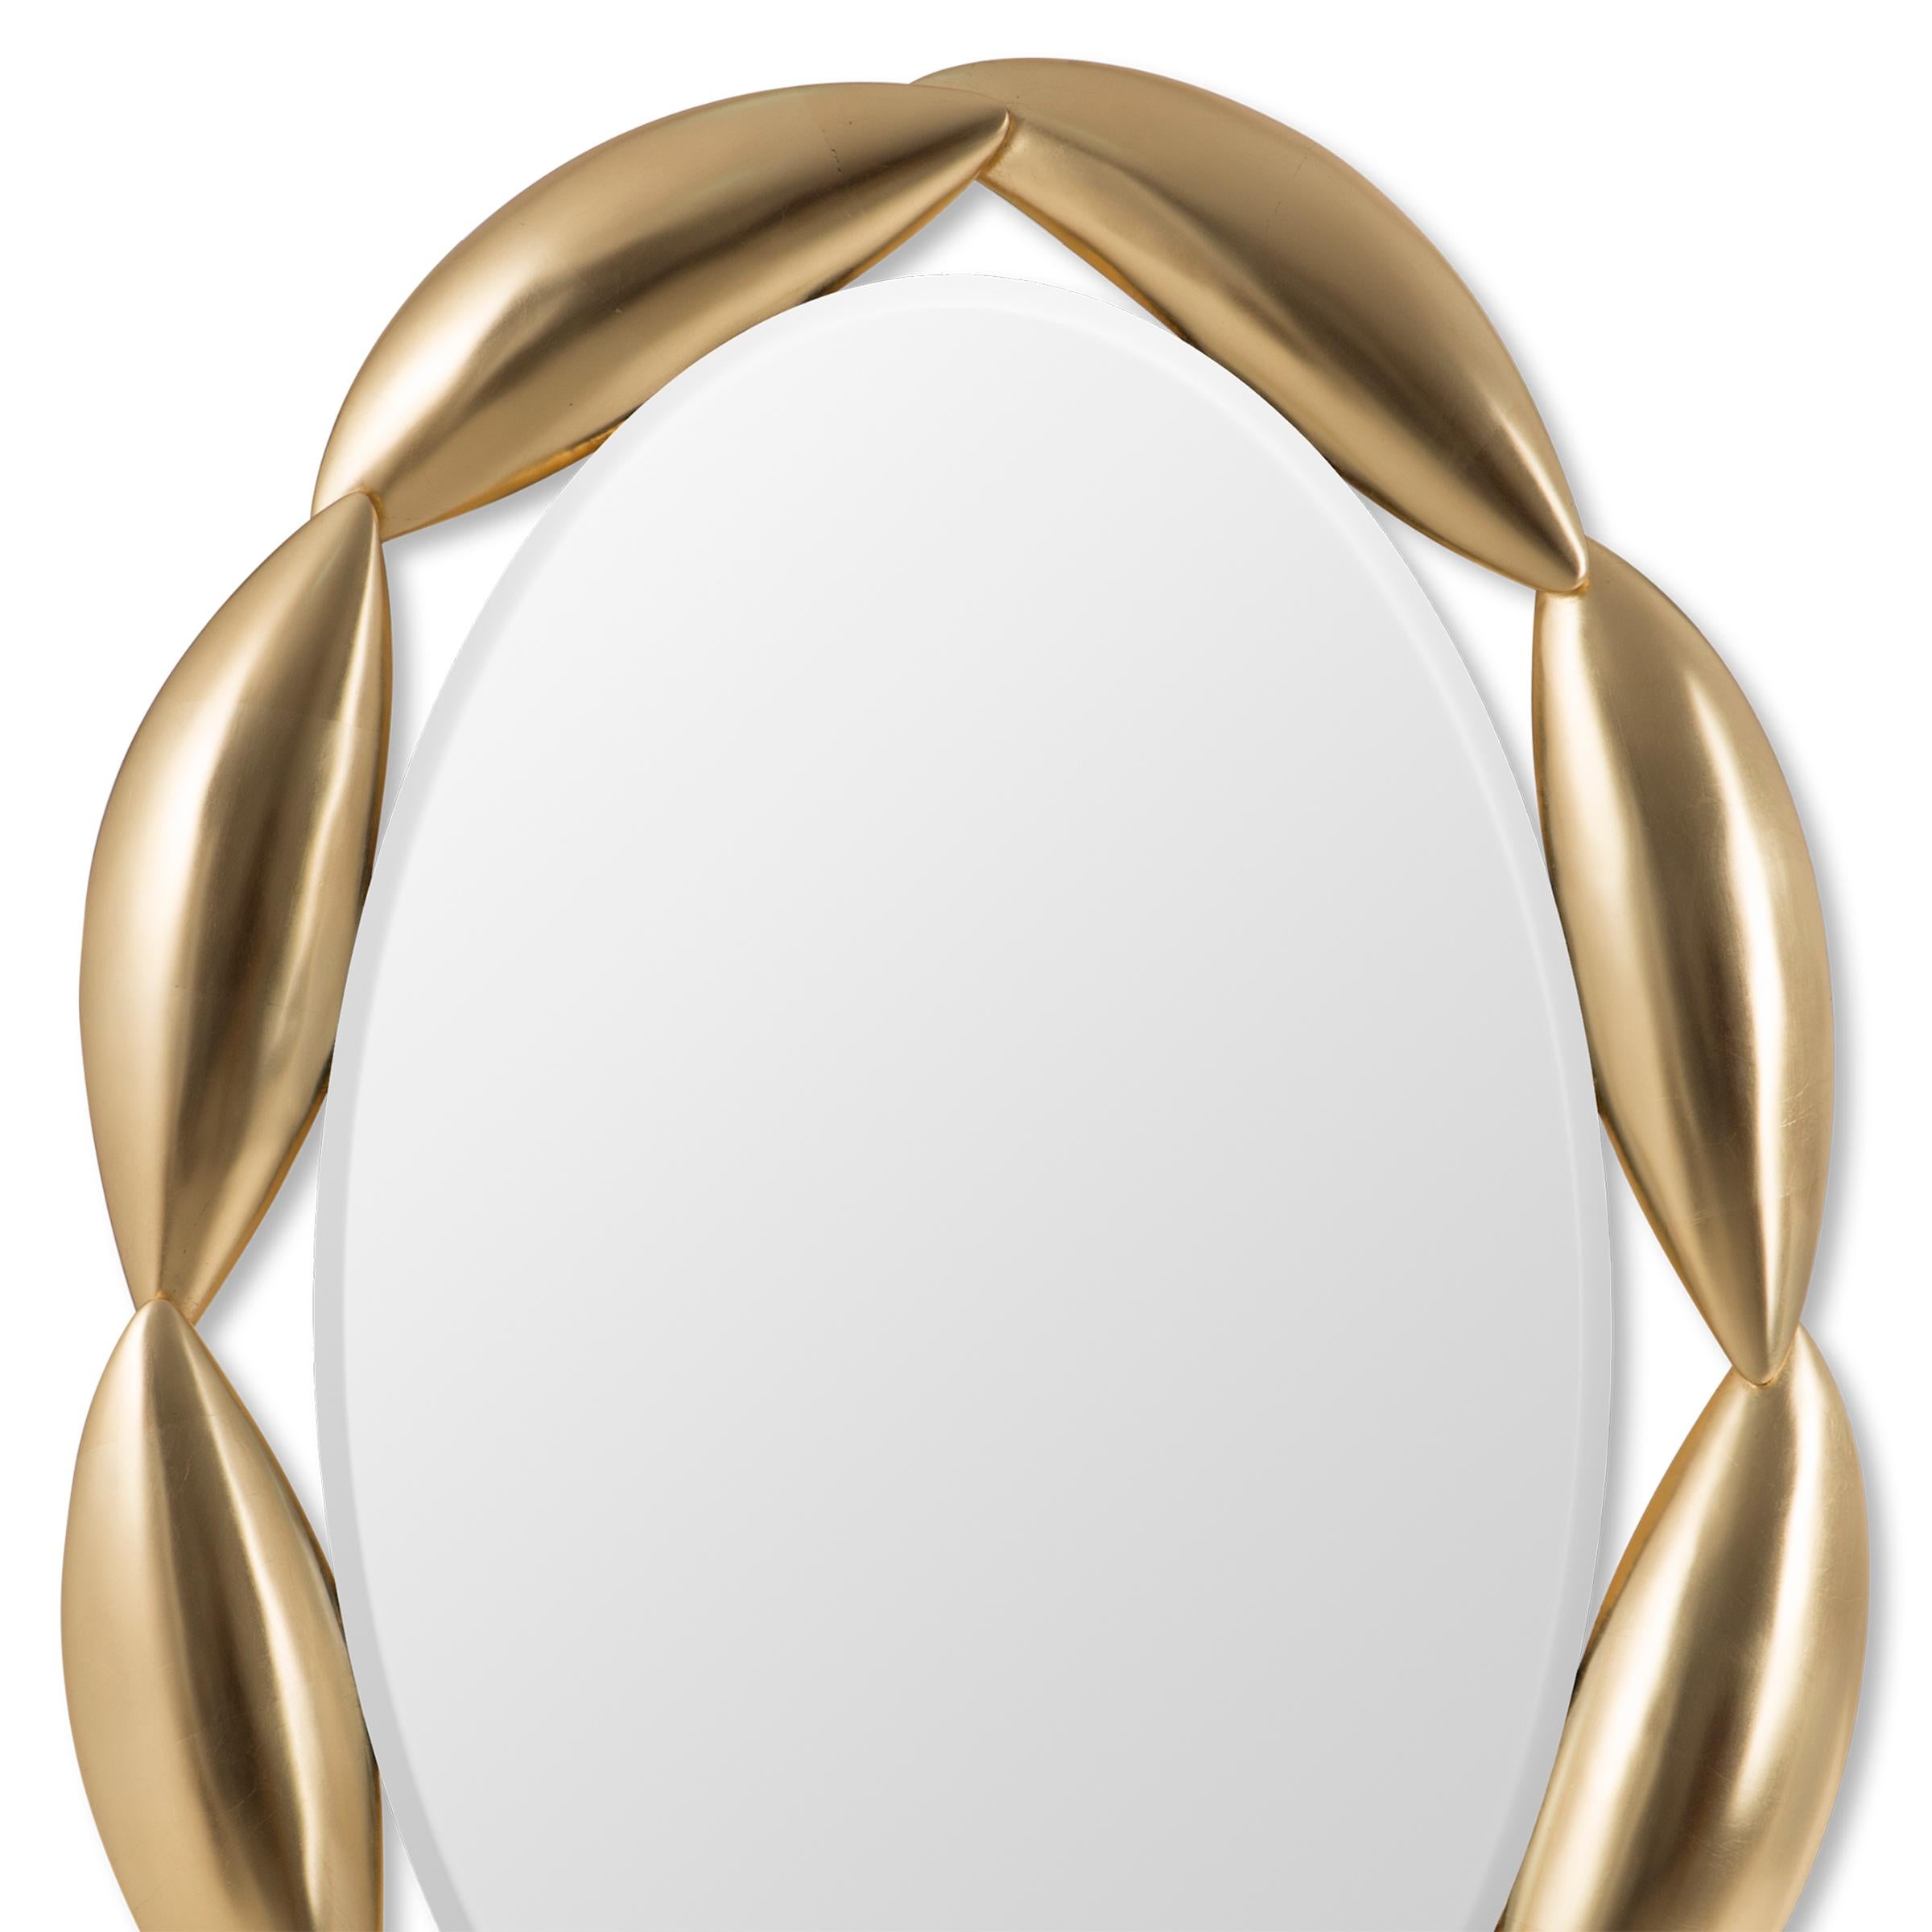 Mirror Necklace Gold with solid
mahogany hand-carved wood frame
with gold leaf paint. With bevelled 
mirror glass.
Also available with silver leaf paint
or in black lacquered finish.